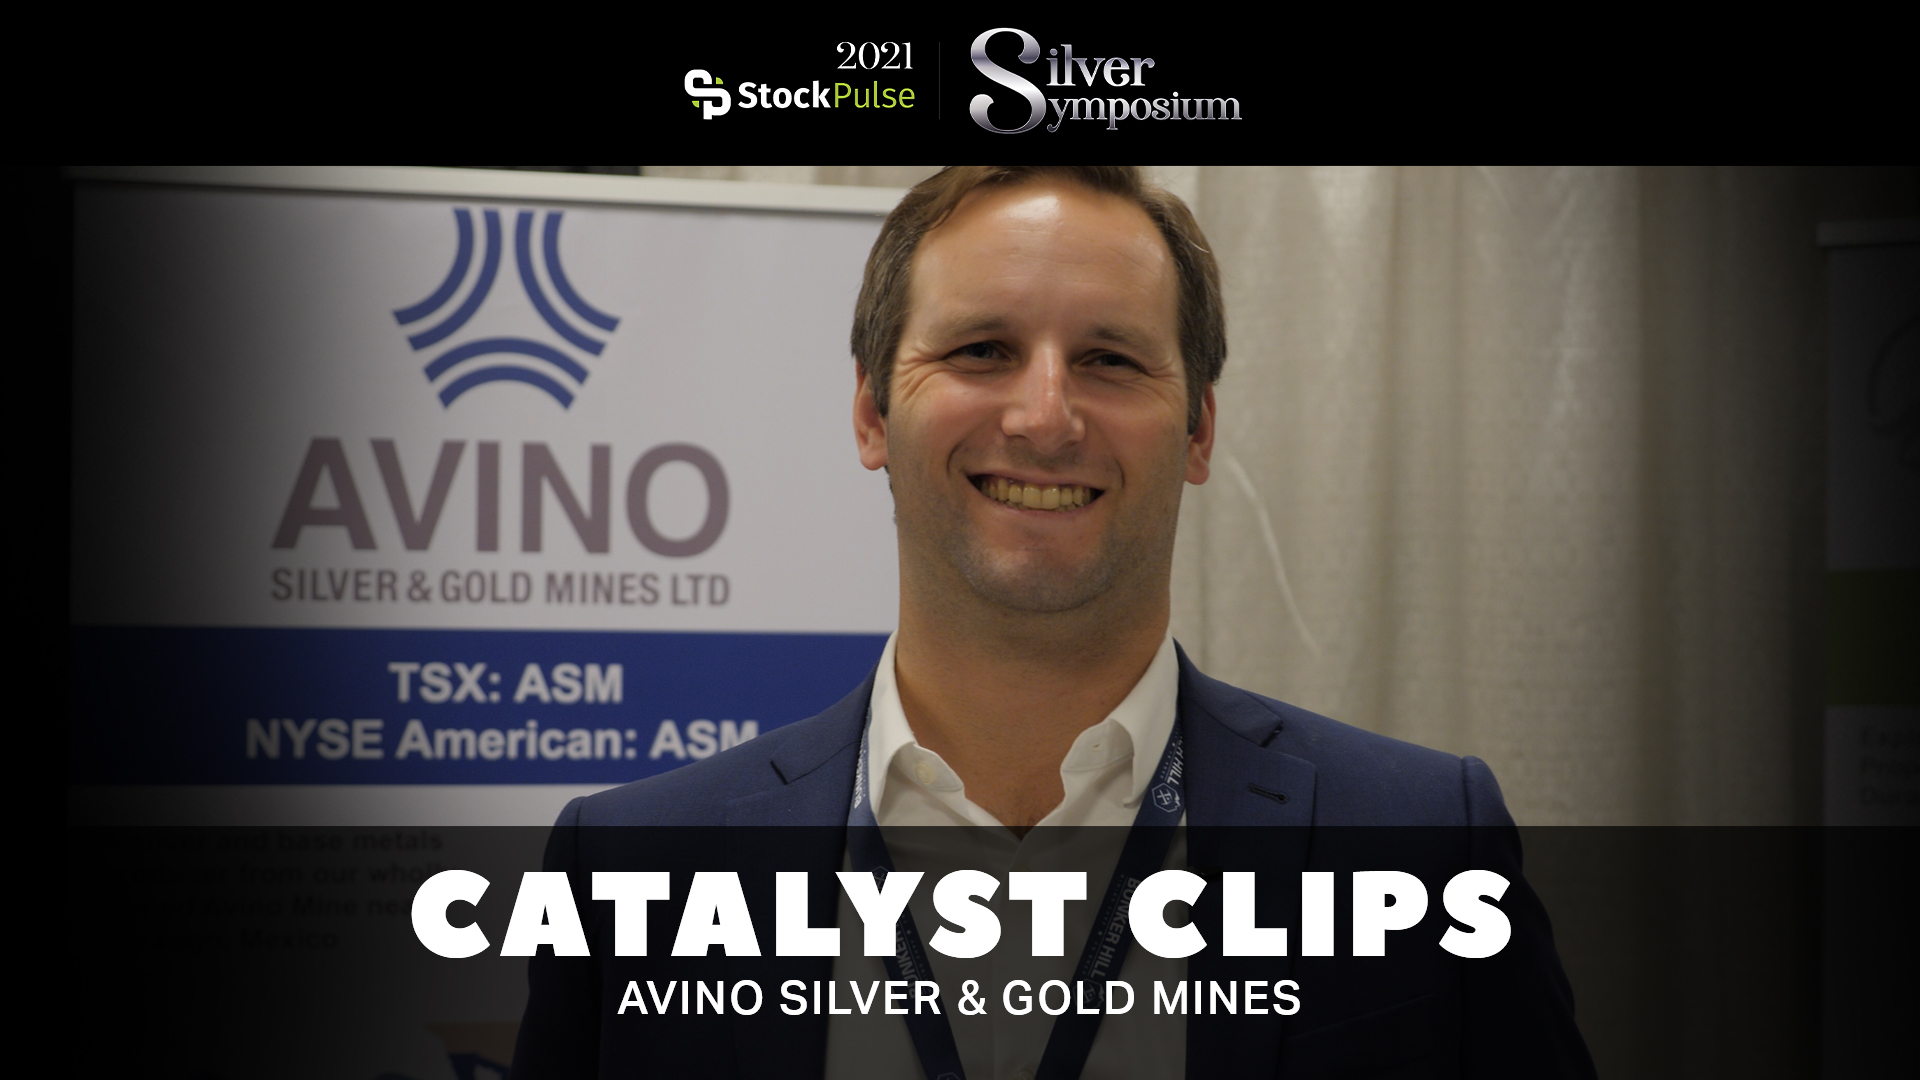 2021 StockPulse Silver Symposium Catalyst Clips | Nathan Harte of Avino Silver & Gold Mines